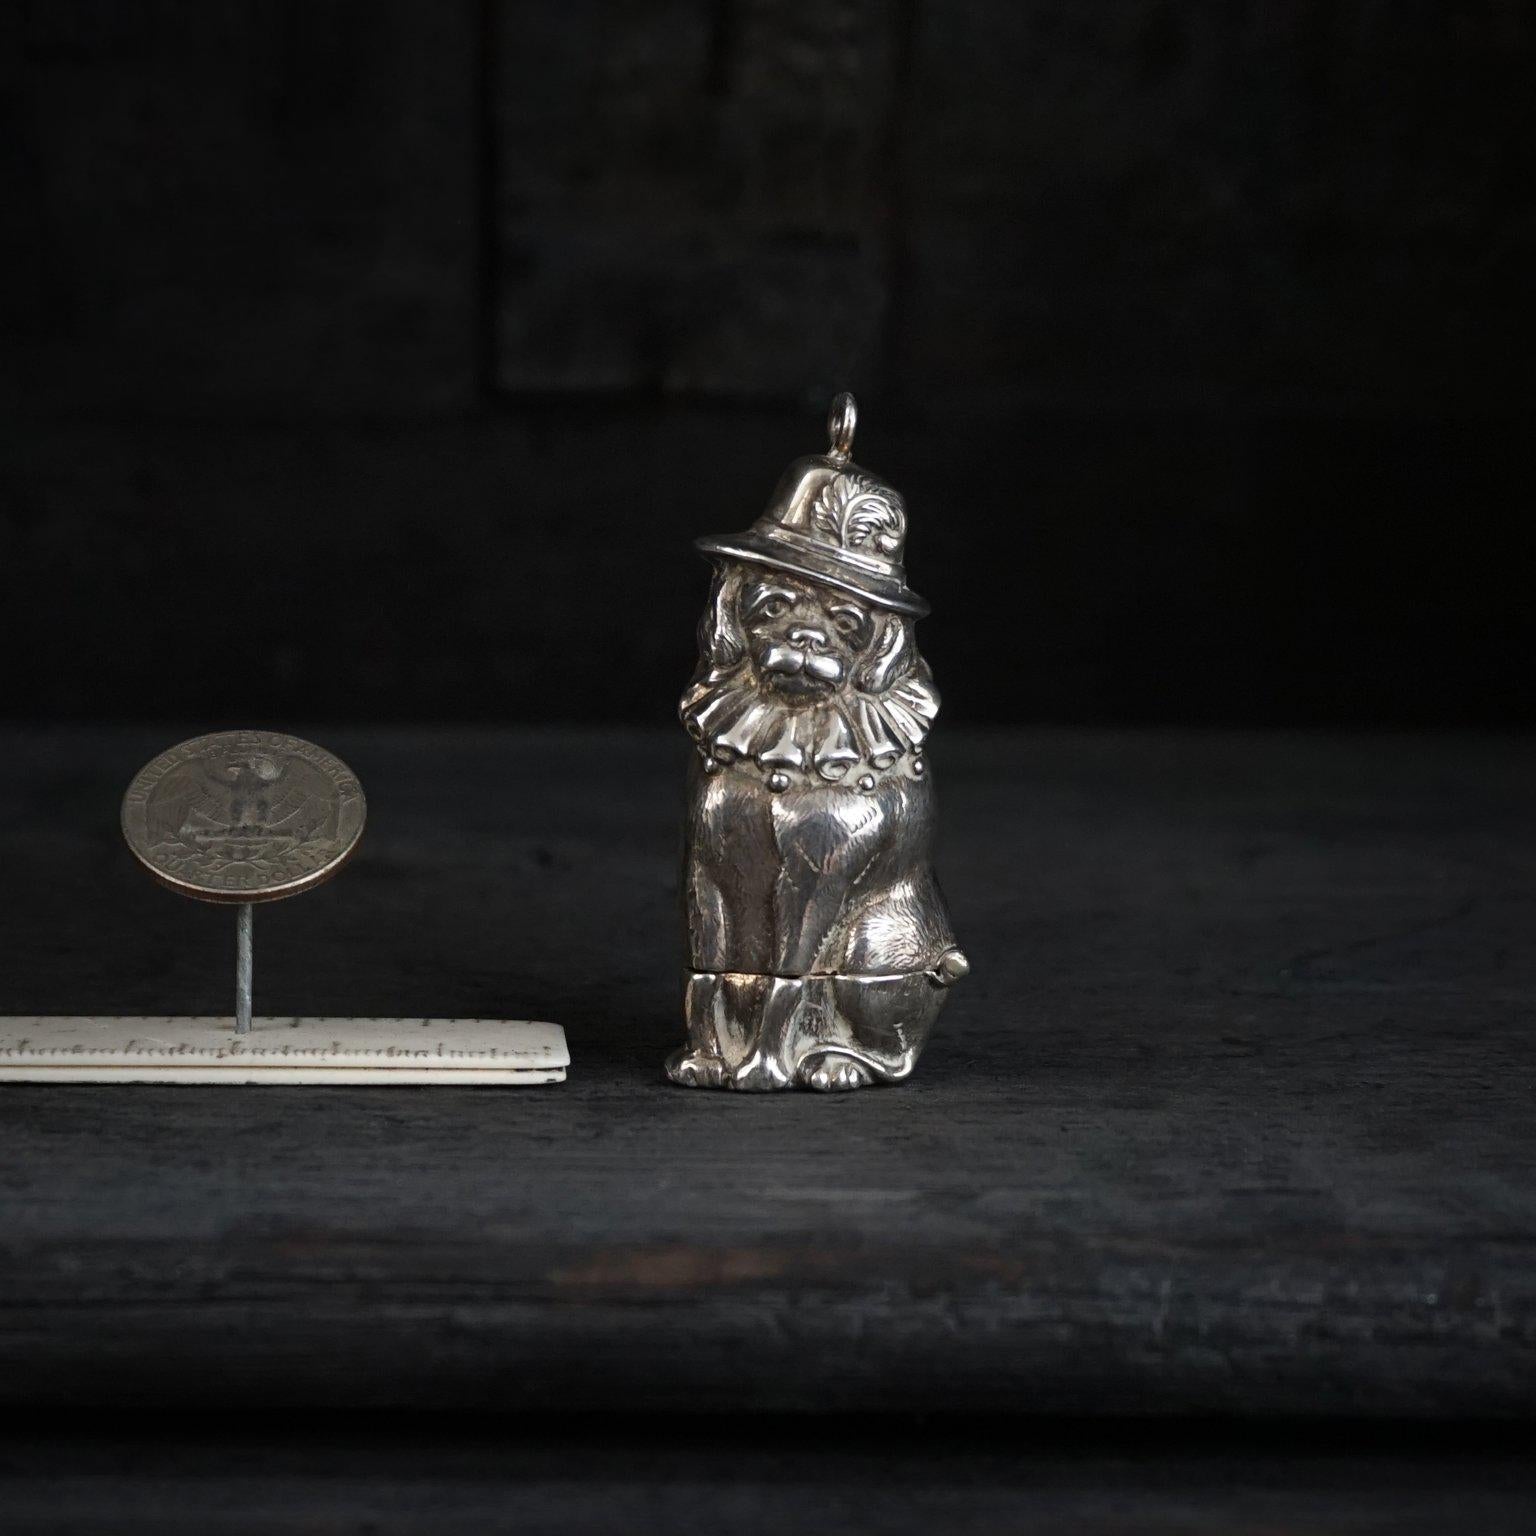 Delightful vintage novelty sterling silver Vesta case or matchbox with a hinged opening and striker to the base. 
Charming item which is made in the form of dog Toby, also known as Mr Punch and Judy's dog. 

This cutie is wearing a plumed hat and a